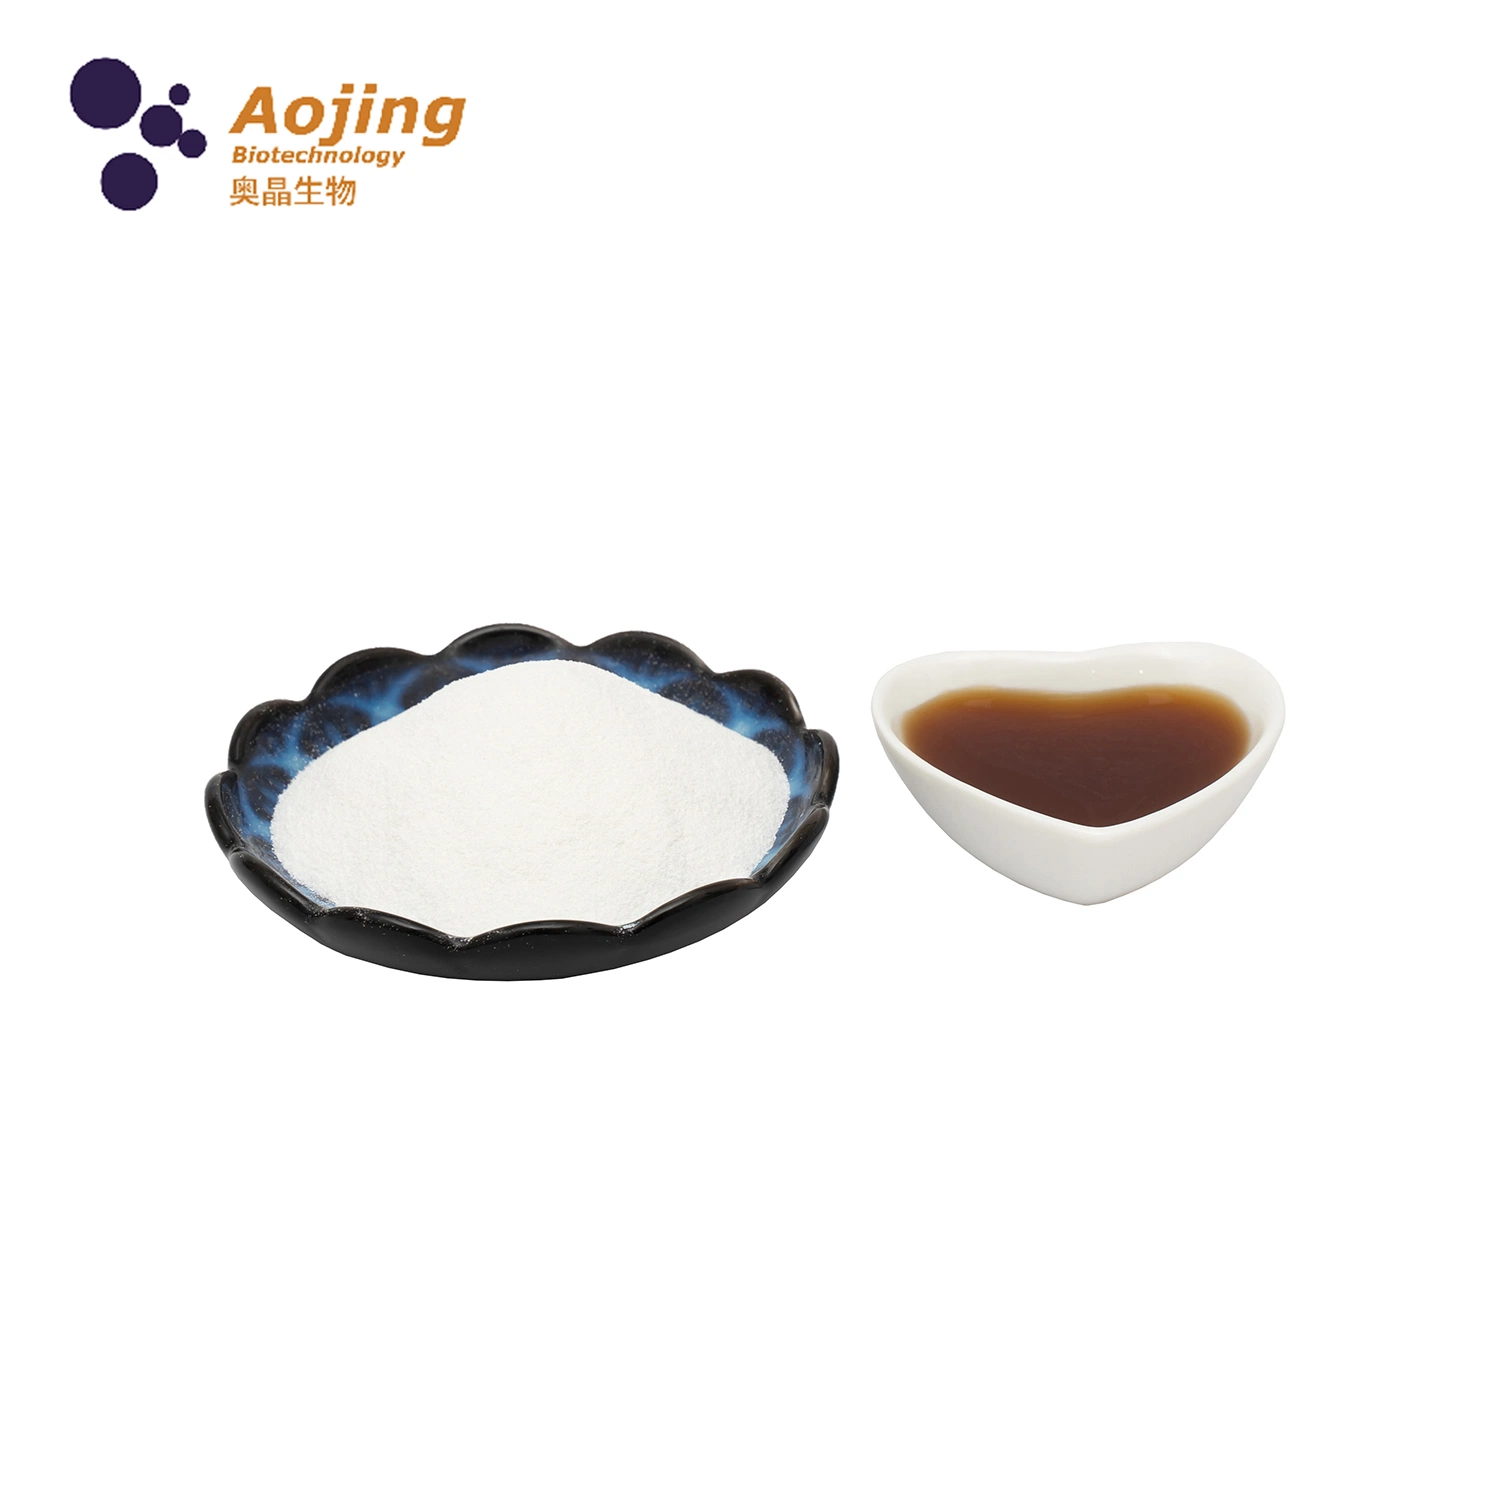 Aojing Biological Pure Natural Sweetener Stevia Extract Food Additive GS95